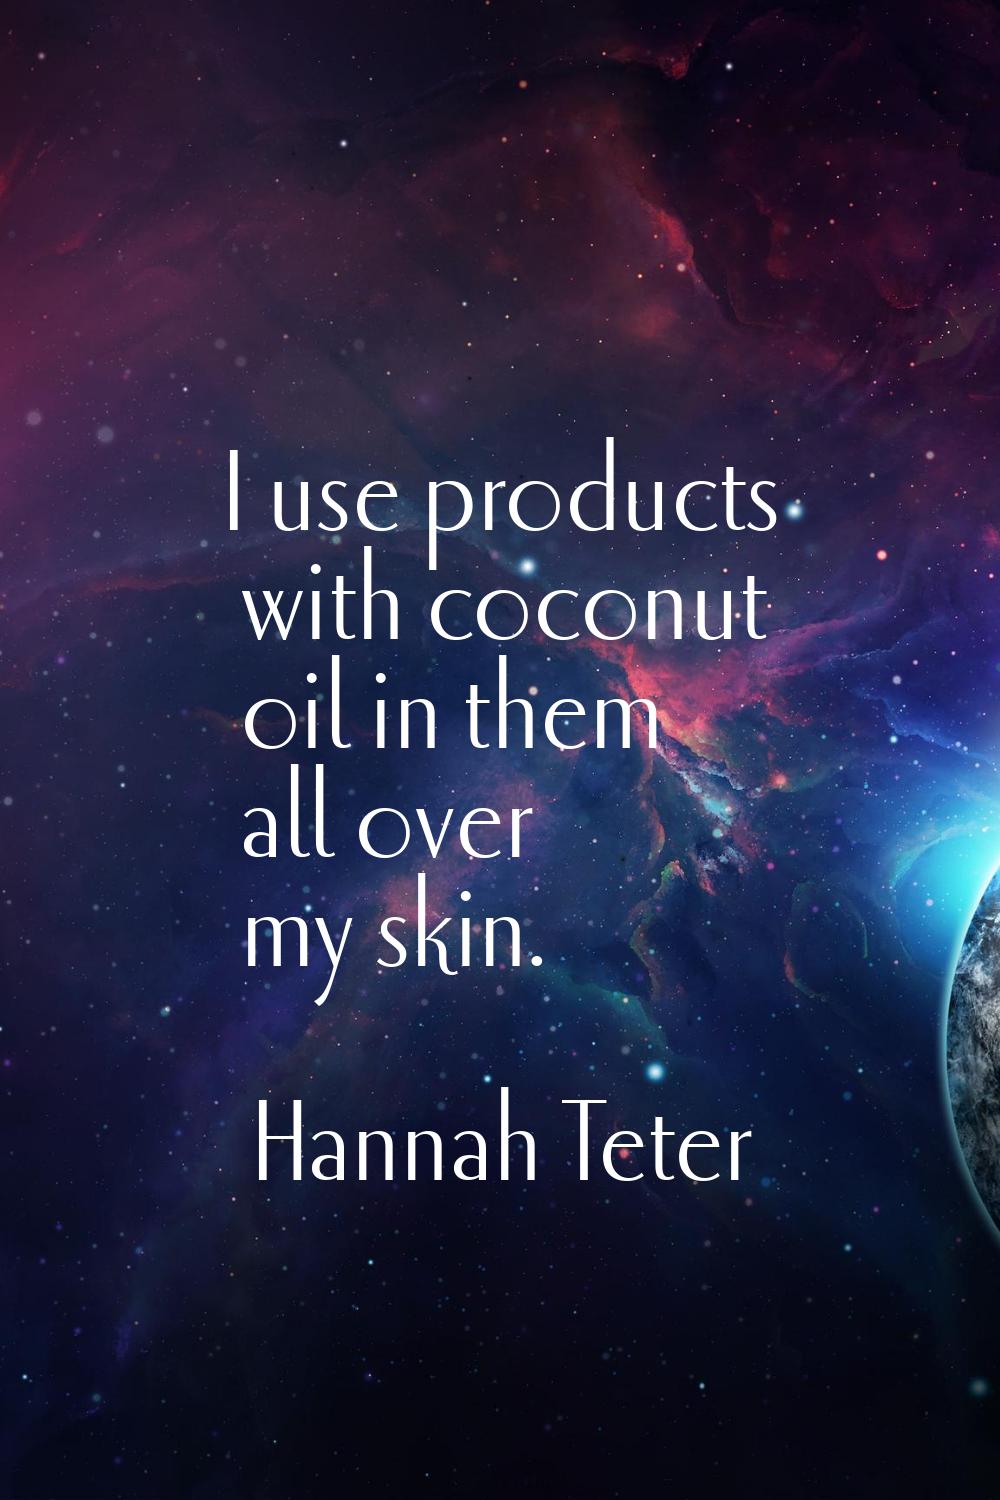 I use products with coconut oil in them all over my skin.